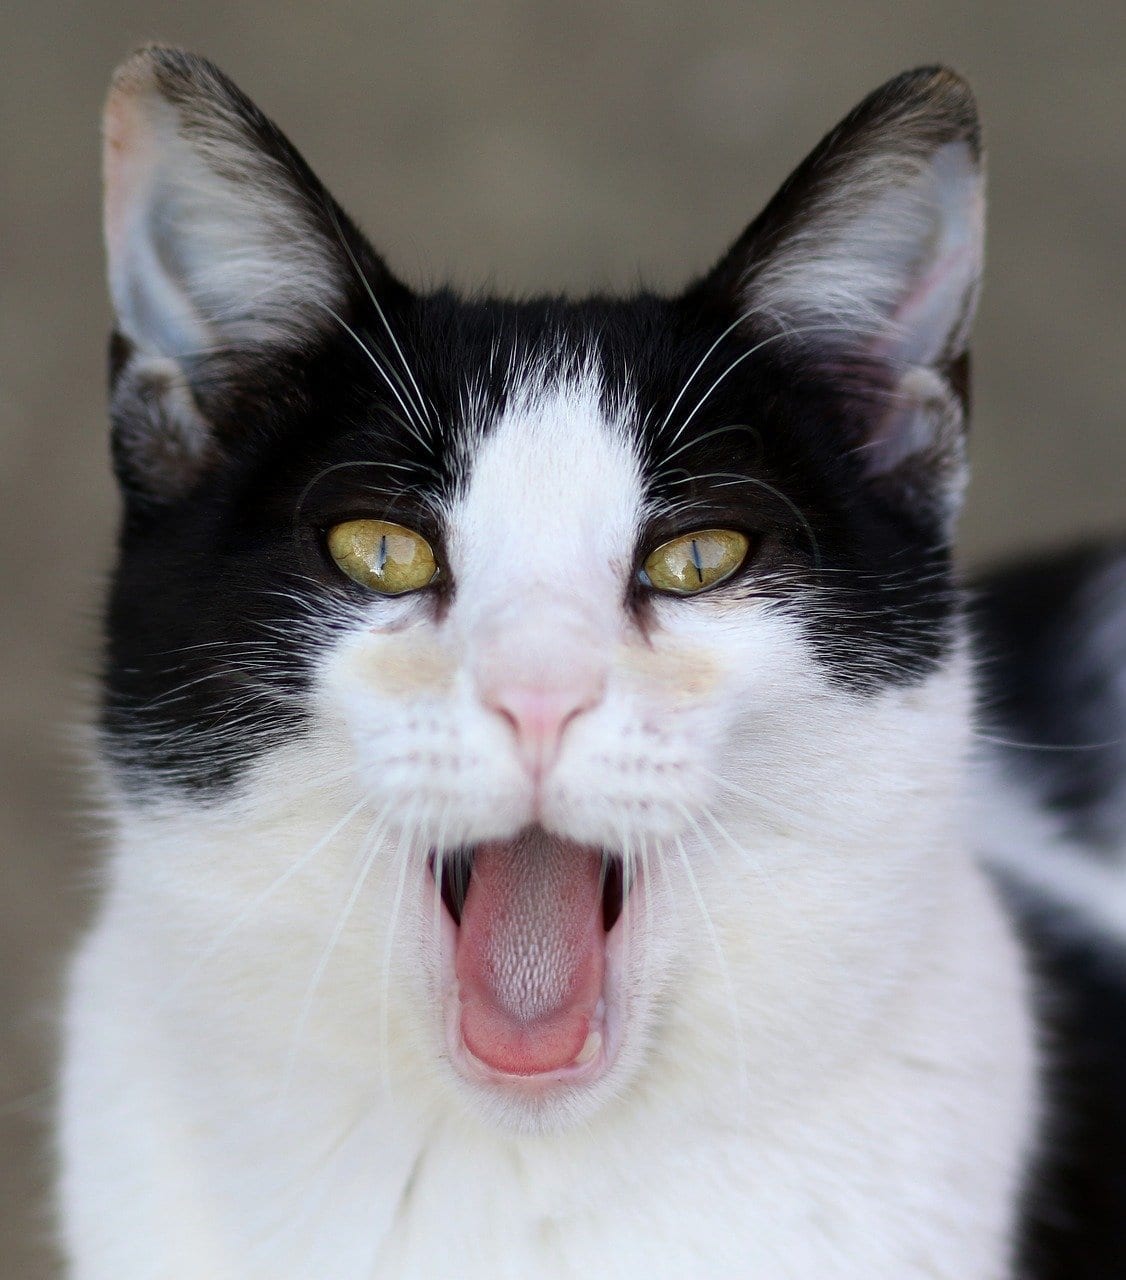 An image of a black and white cat meowing.